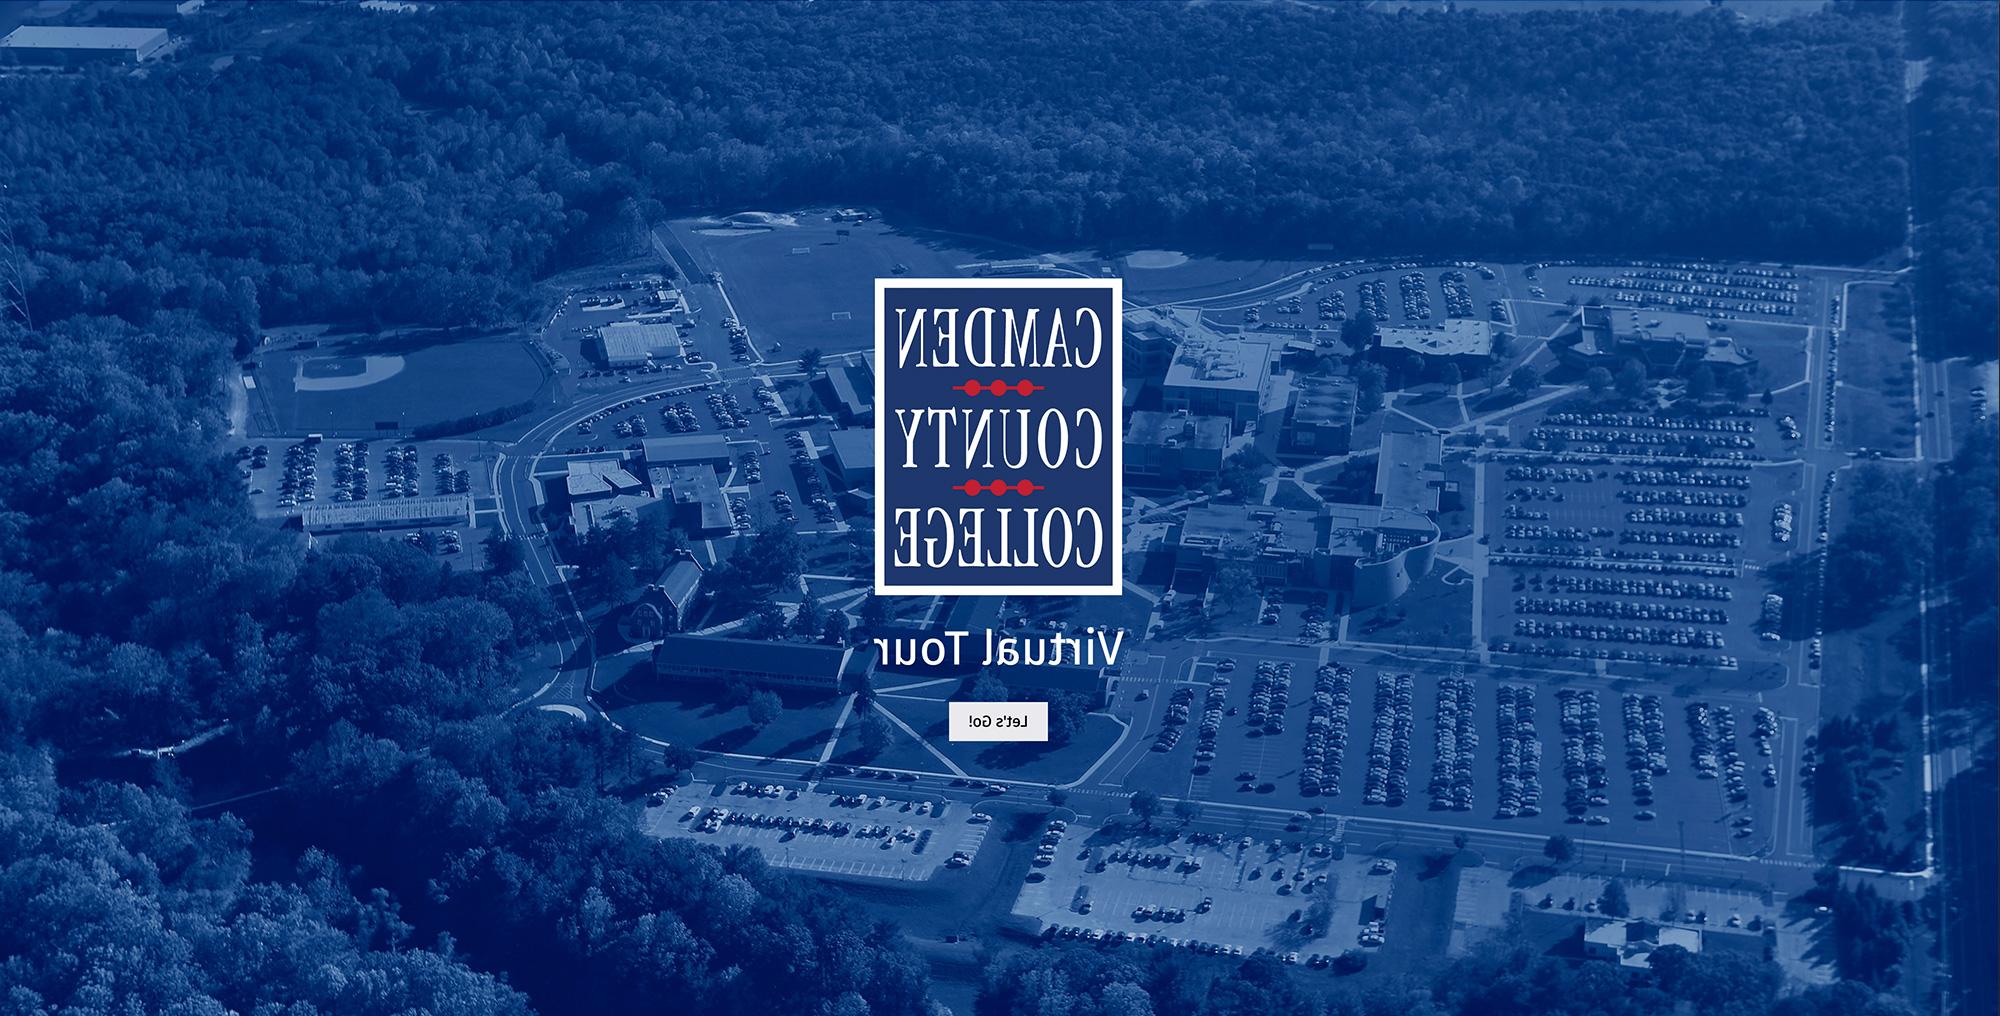 The cover screen of camden county college's blackwood campus virtual tour